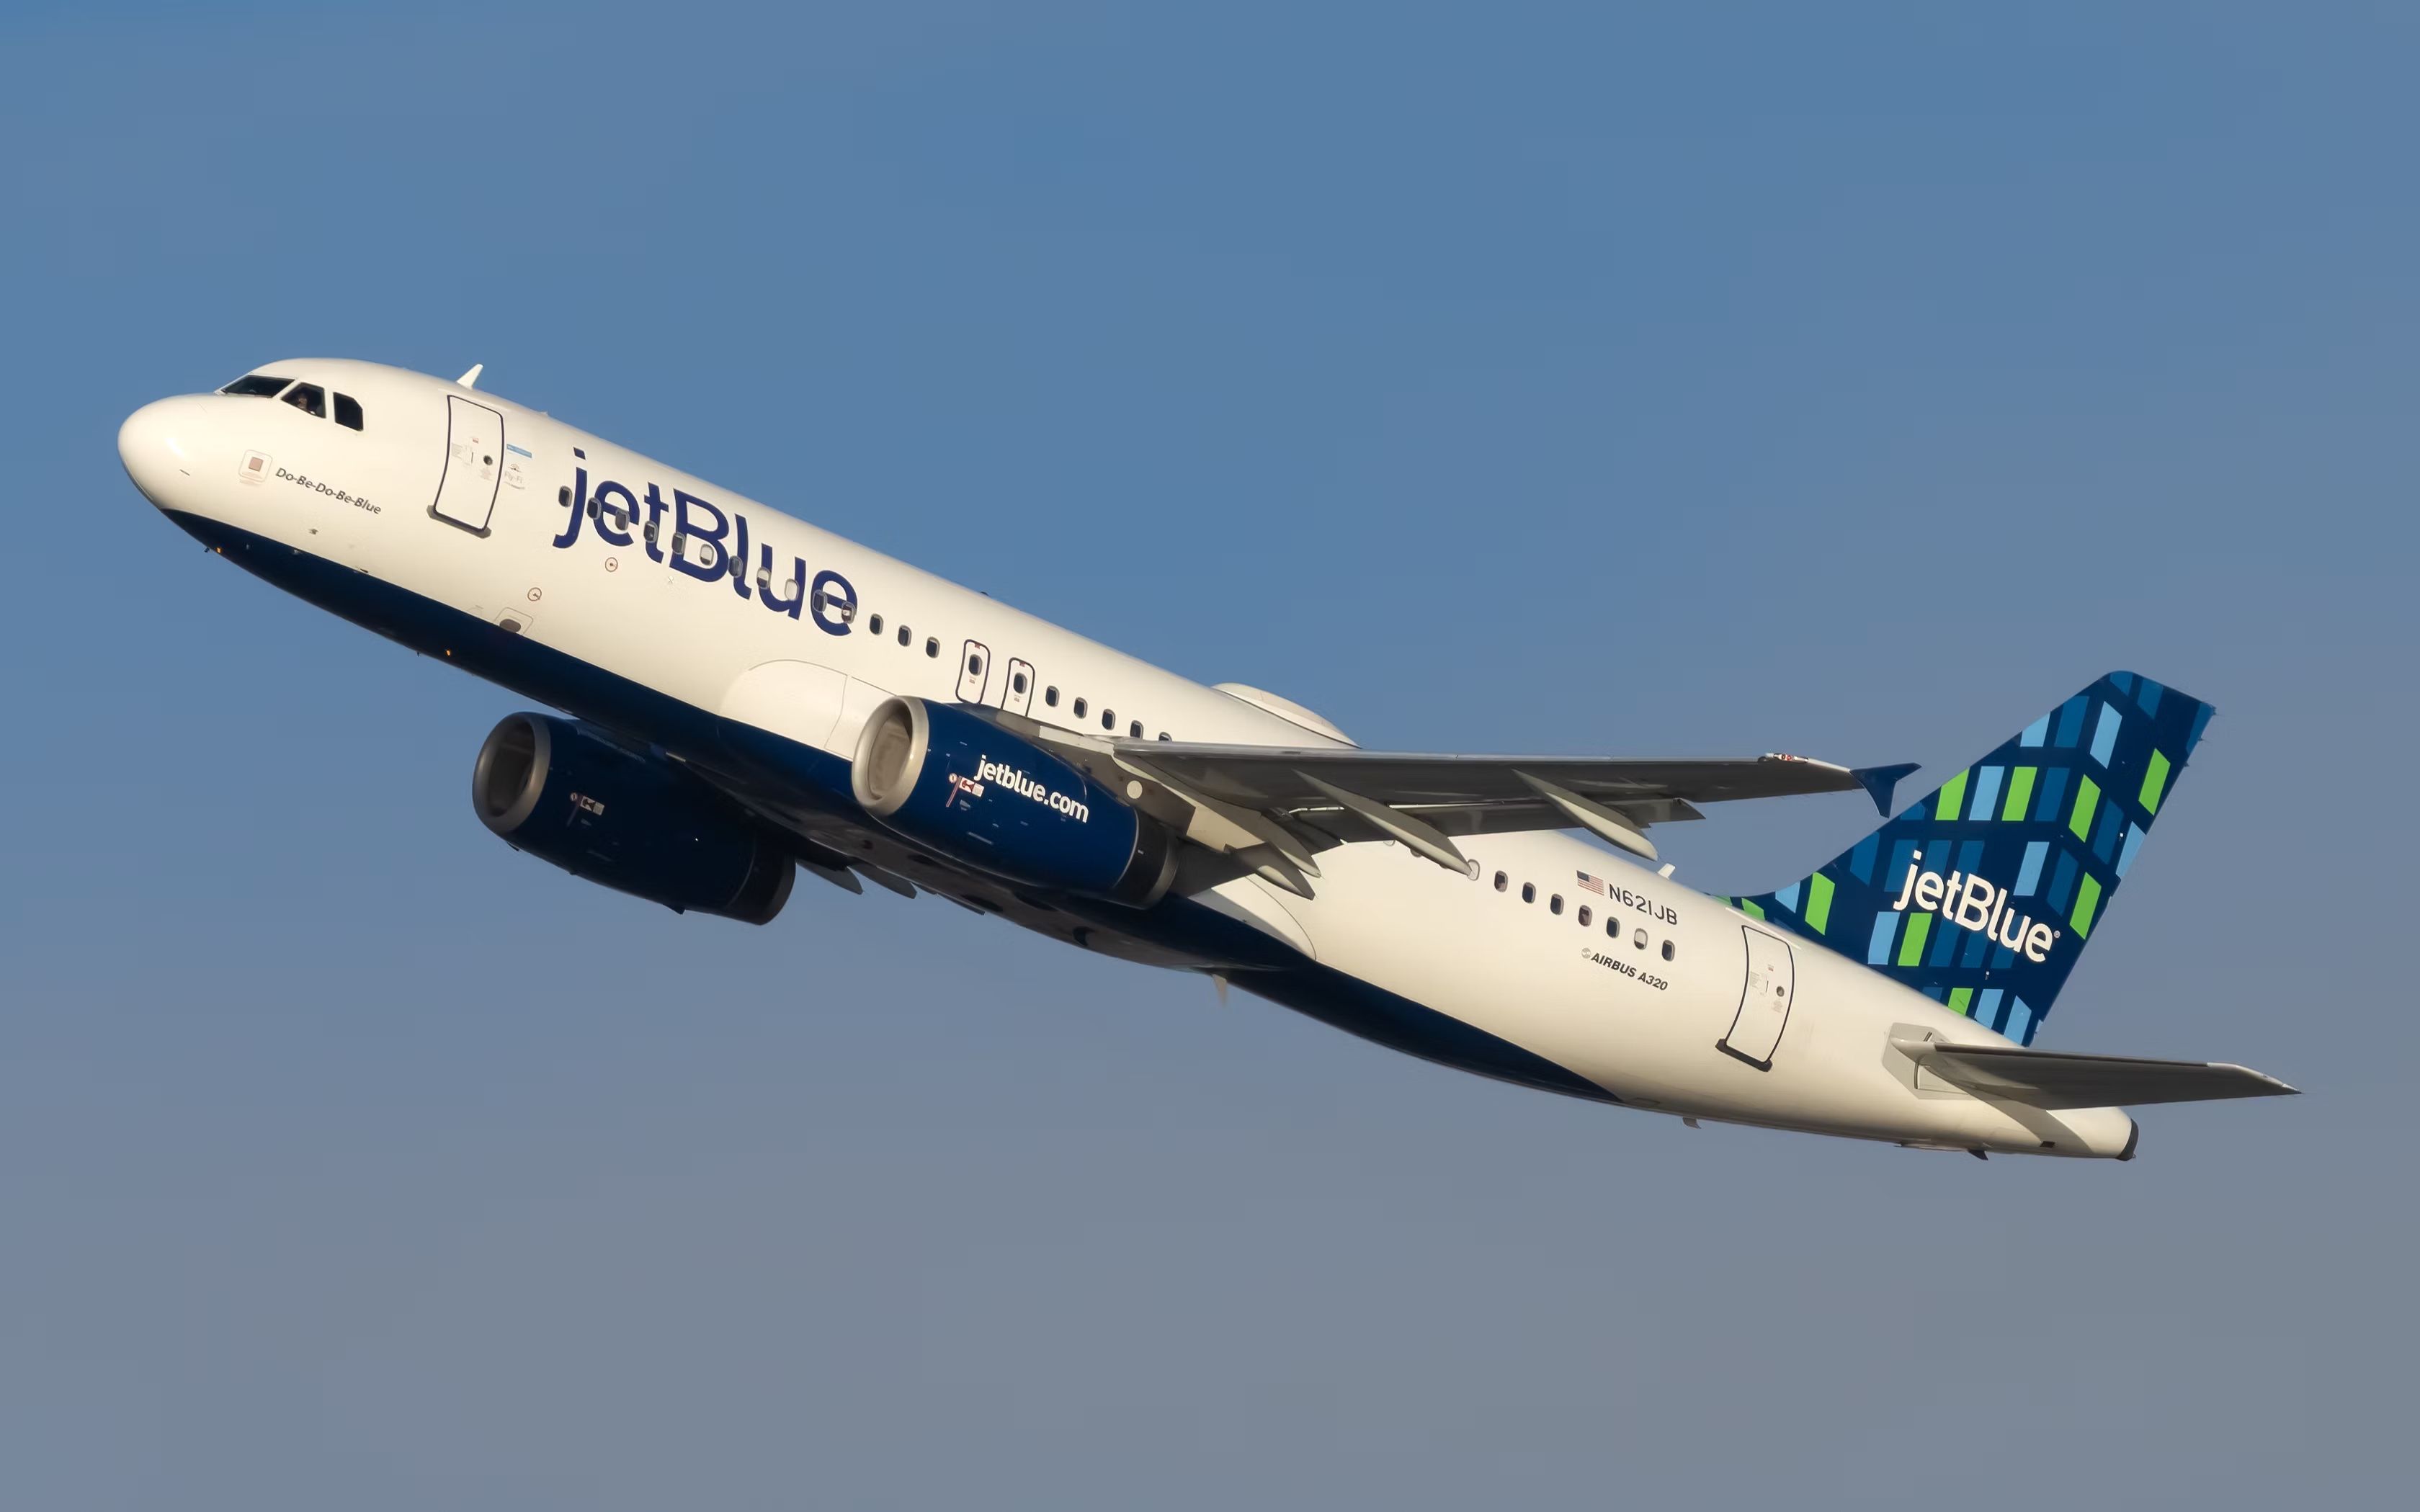 A Jetblue A320-200 flying in the sky.